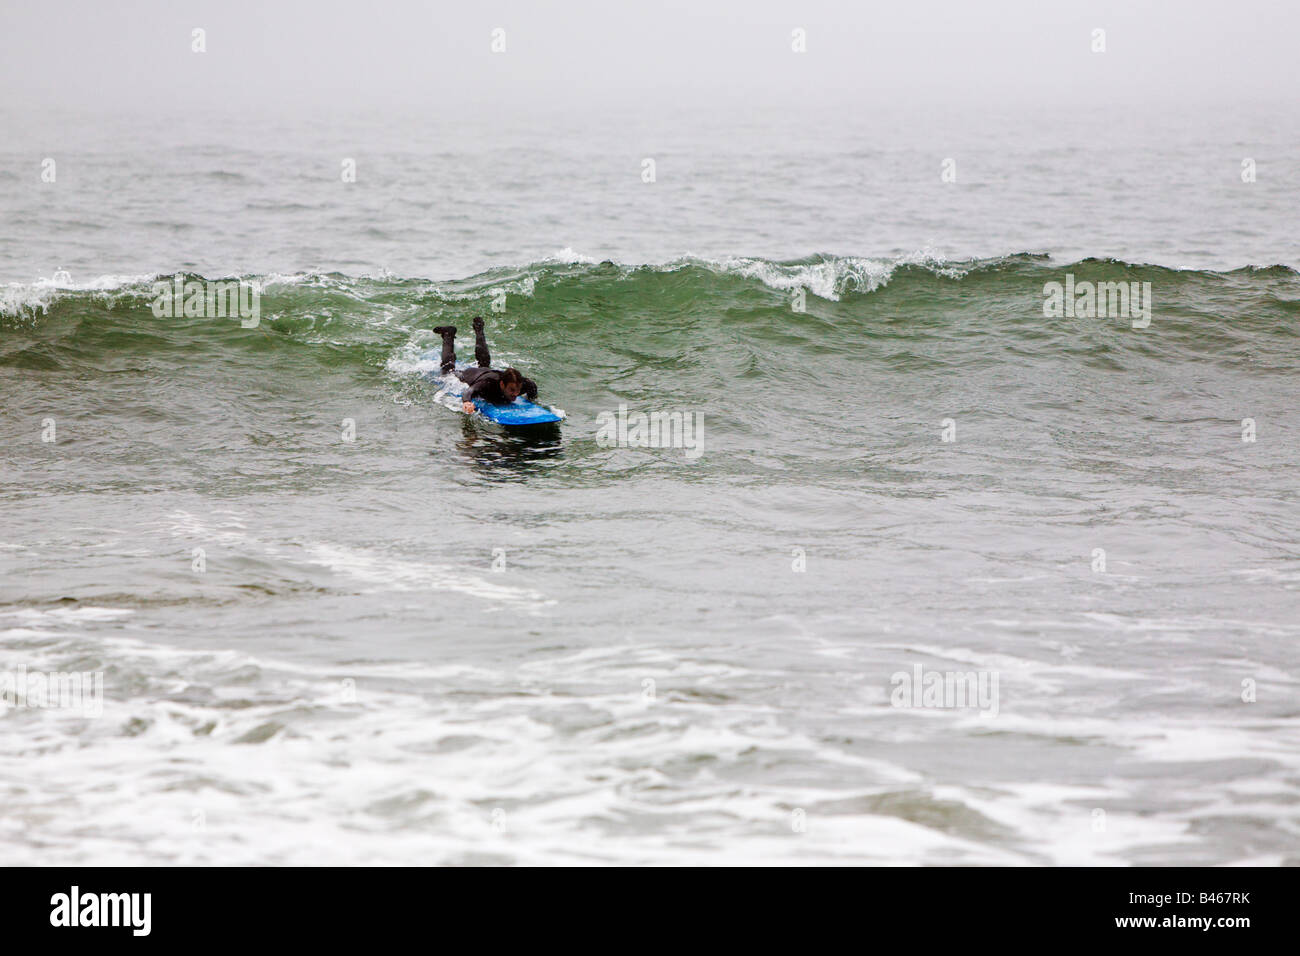 Surfing waves of Far Rockaway Beach during very foggy day New York USA Stock Photo